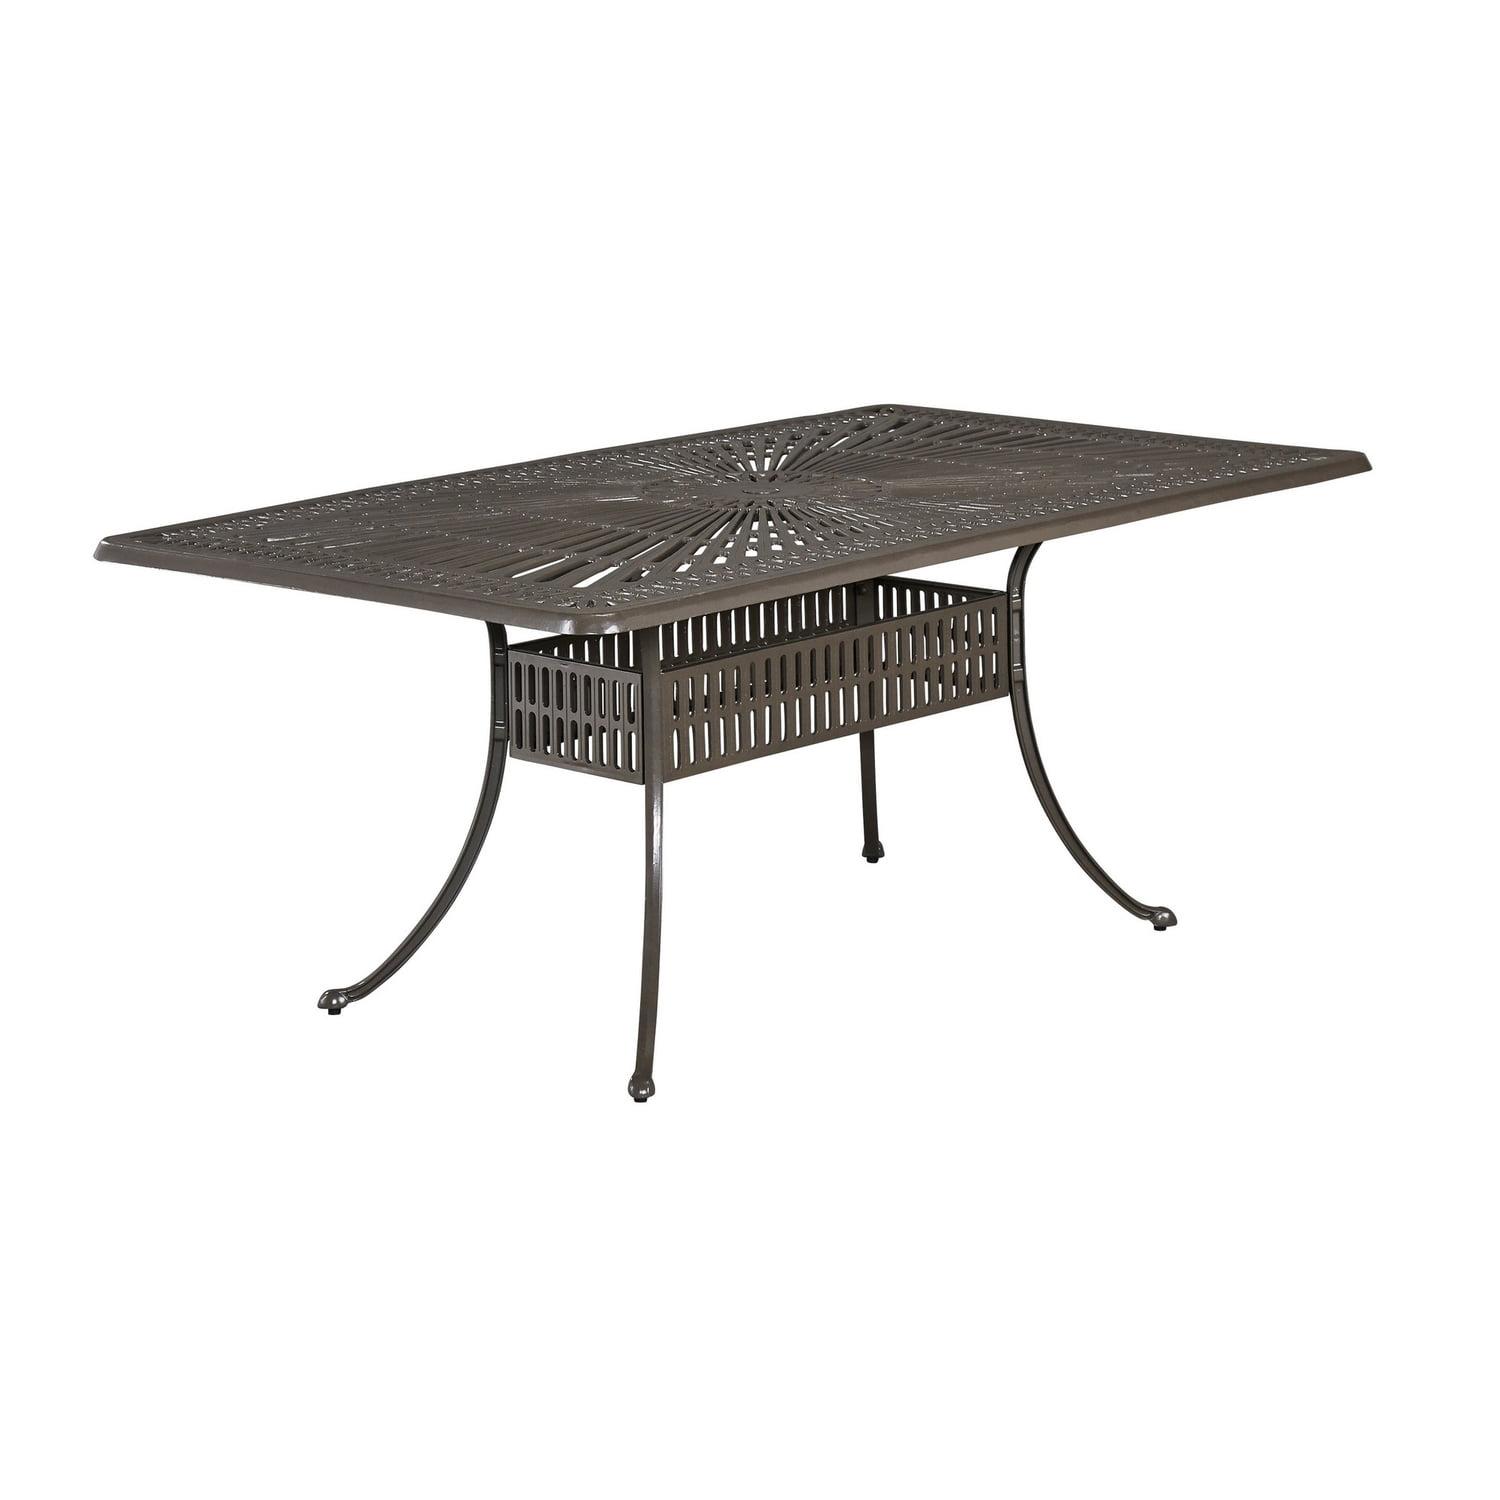 Grenada Charcoal Cast Aluminum Outdoor Dining Table